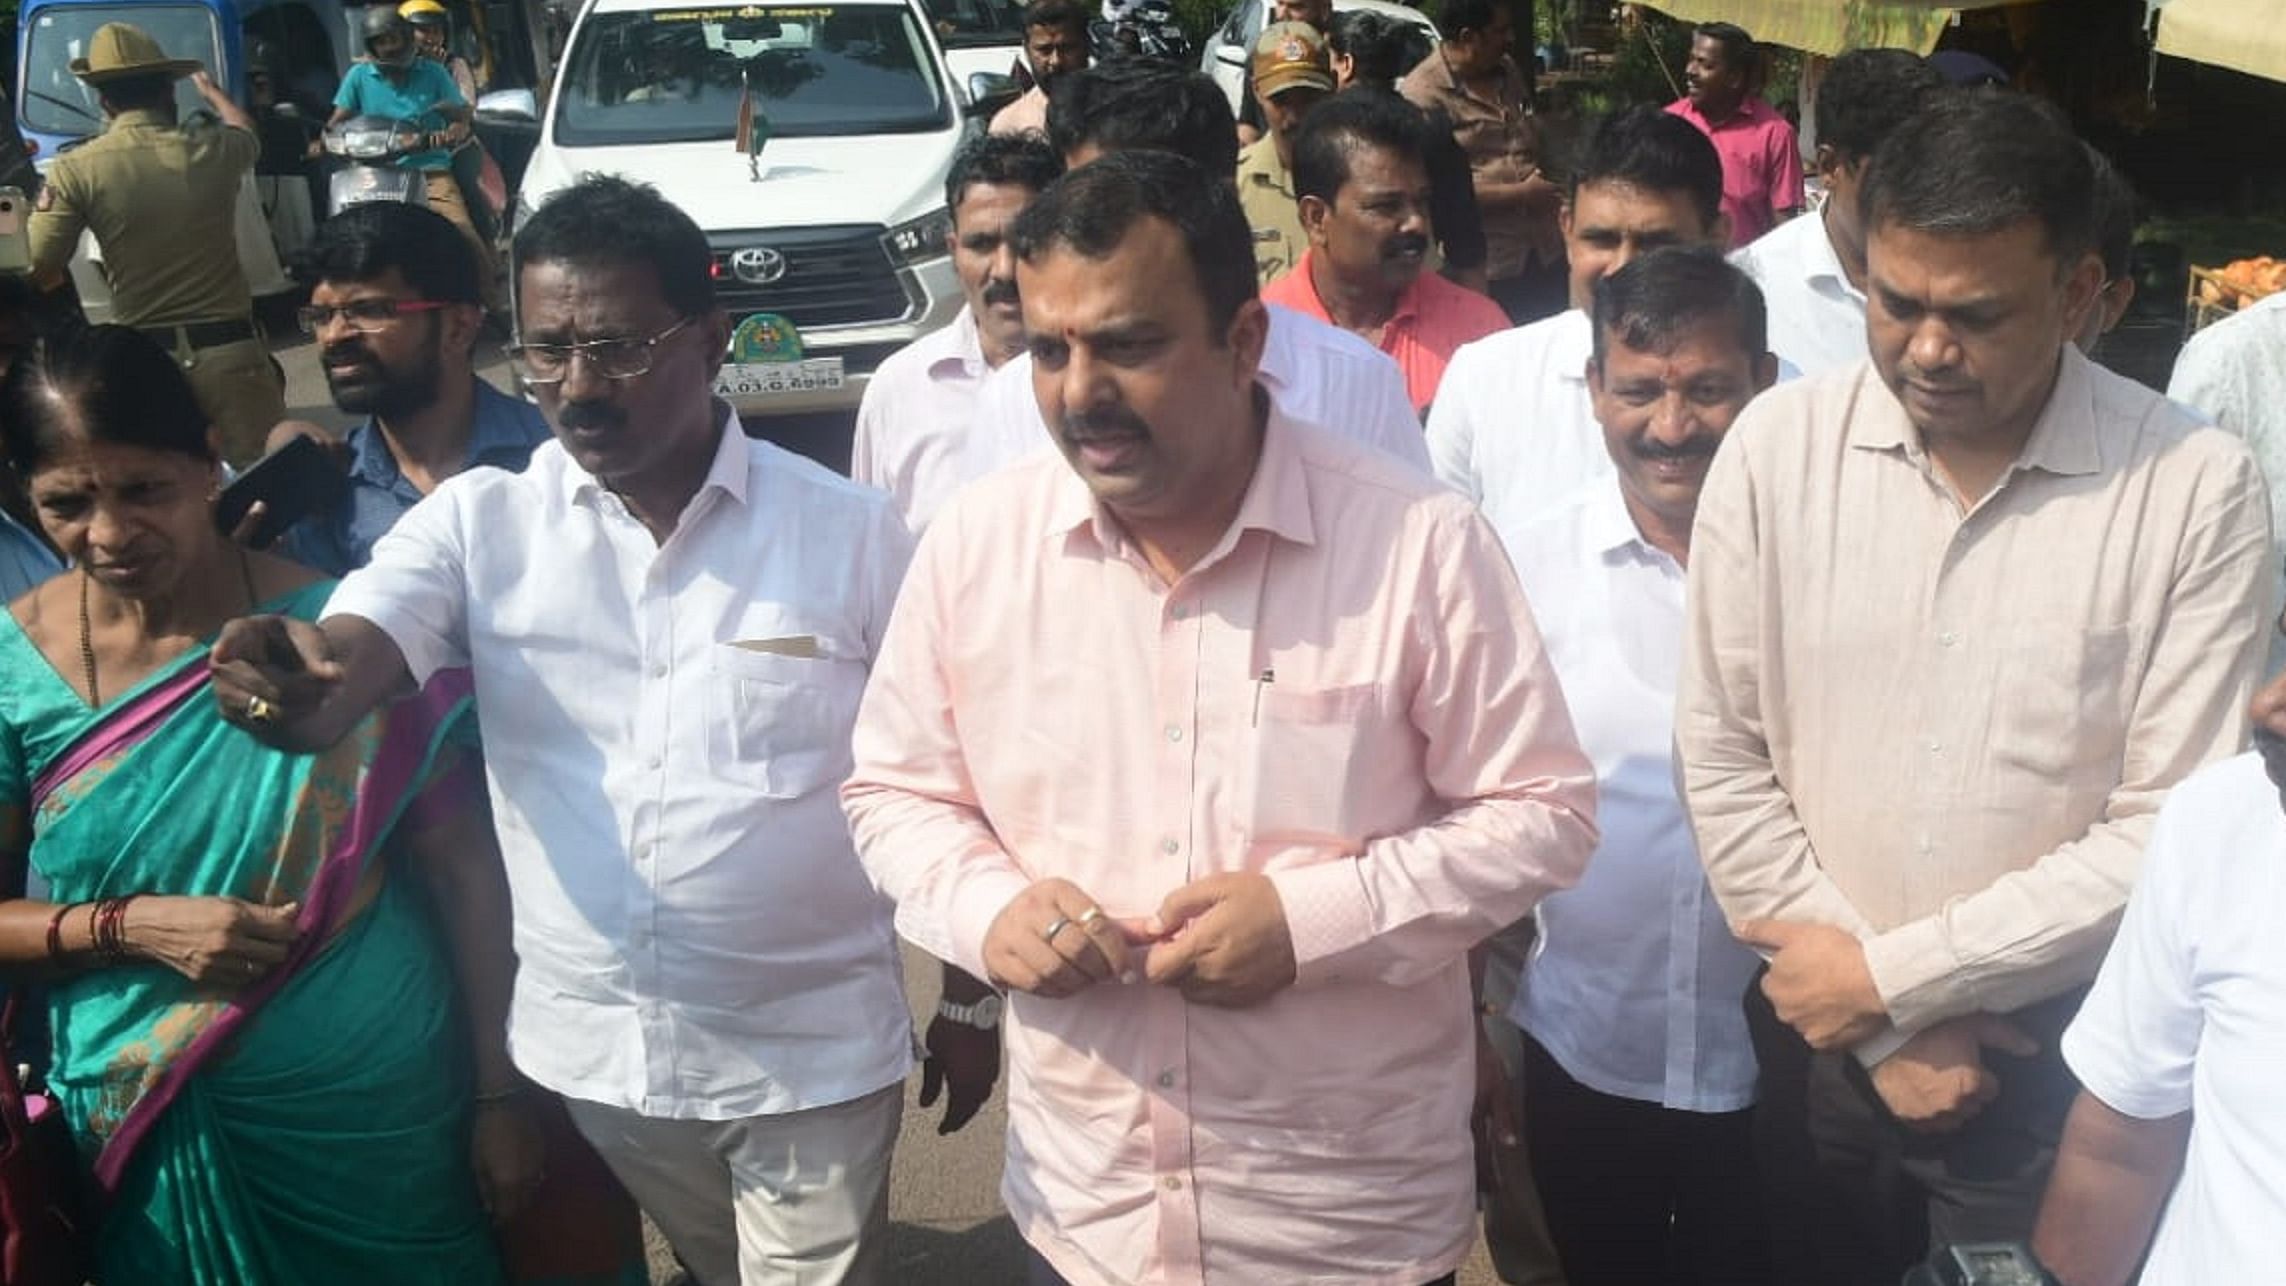 Minister V Sunil Kumar visited the site where blast occurred in a moving autorickshaw. Credit: DH Photo